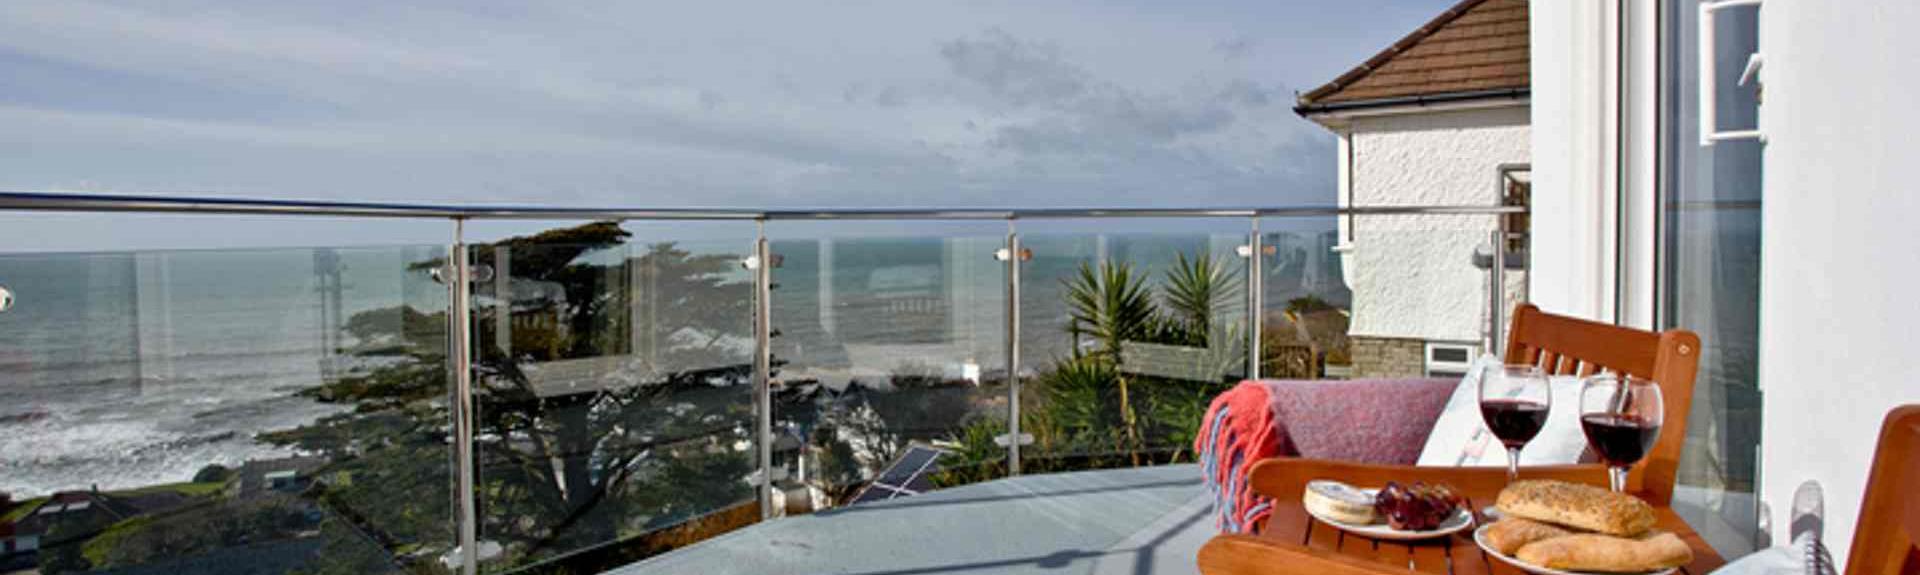 Outdoor  furniture on a glass-fronted balcony offers beach views on the Cornish coast at Downderry